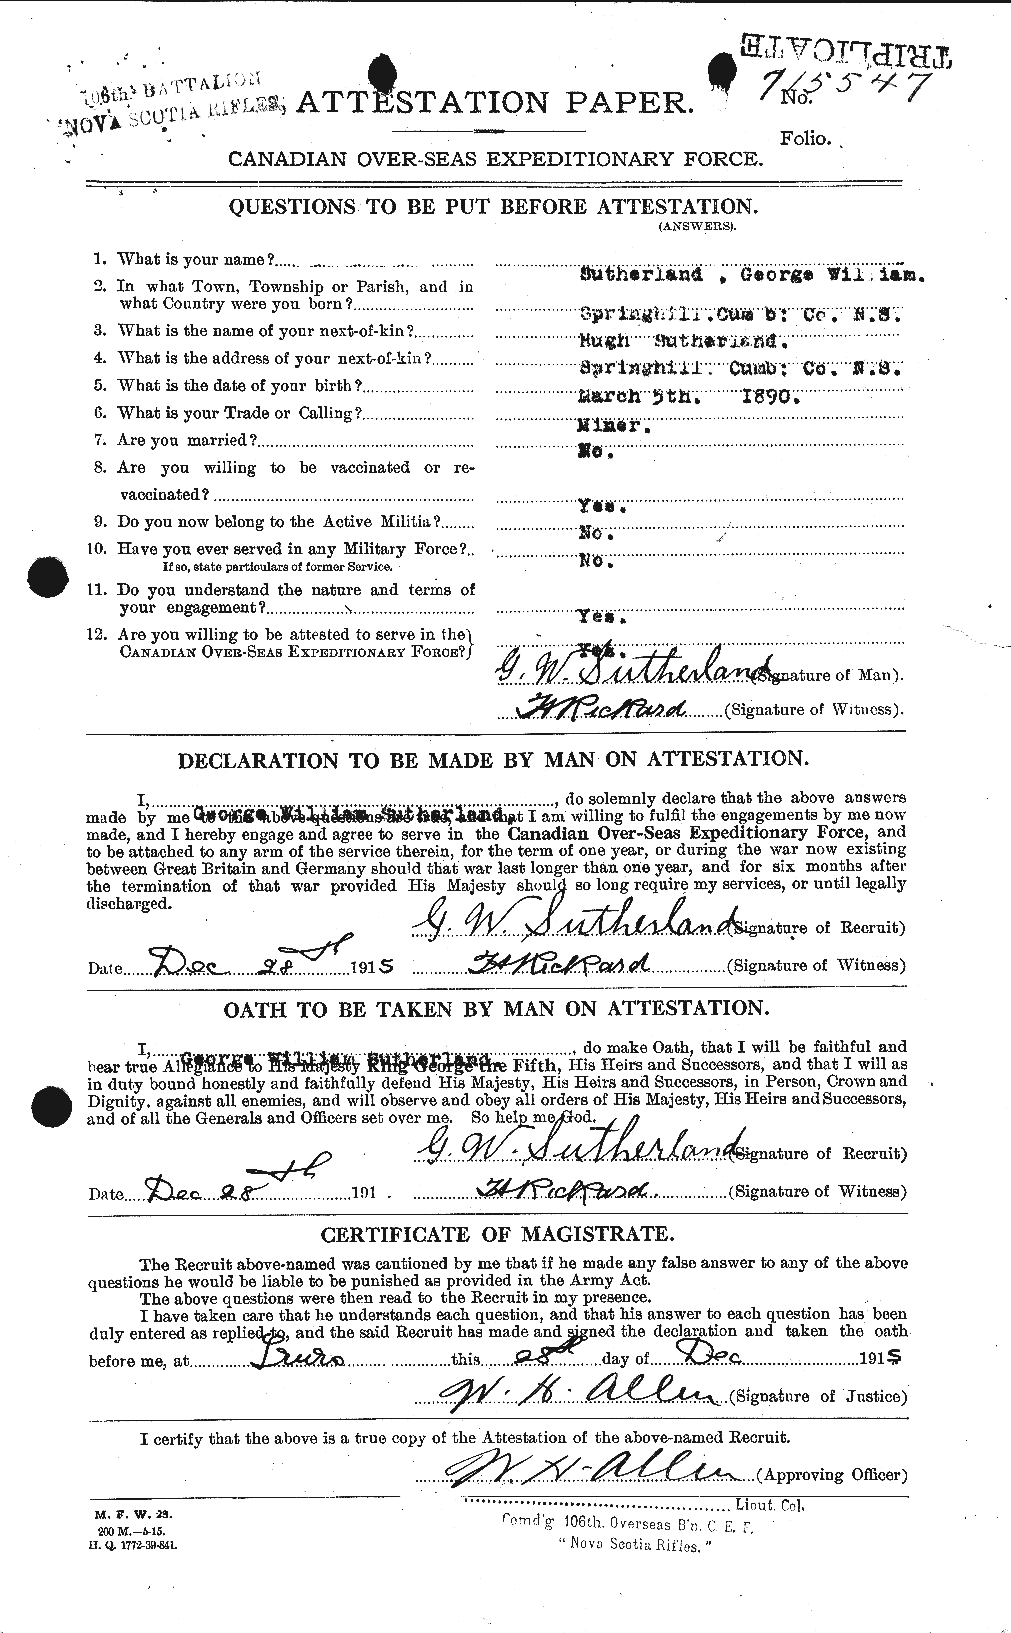 Personnel Records of the First World War - CEF 124842a